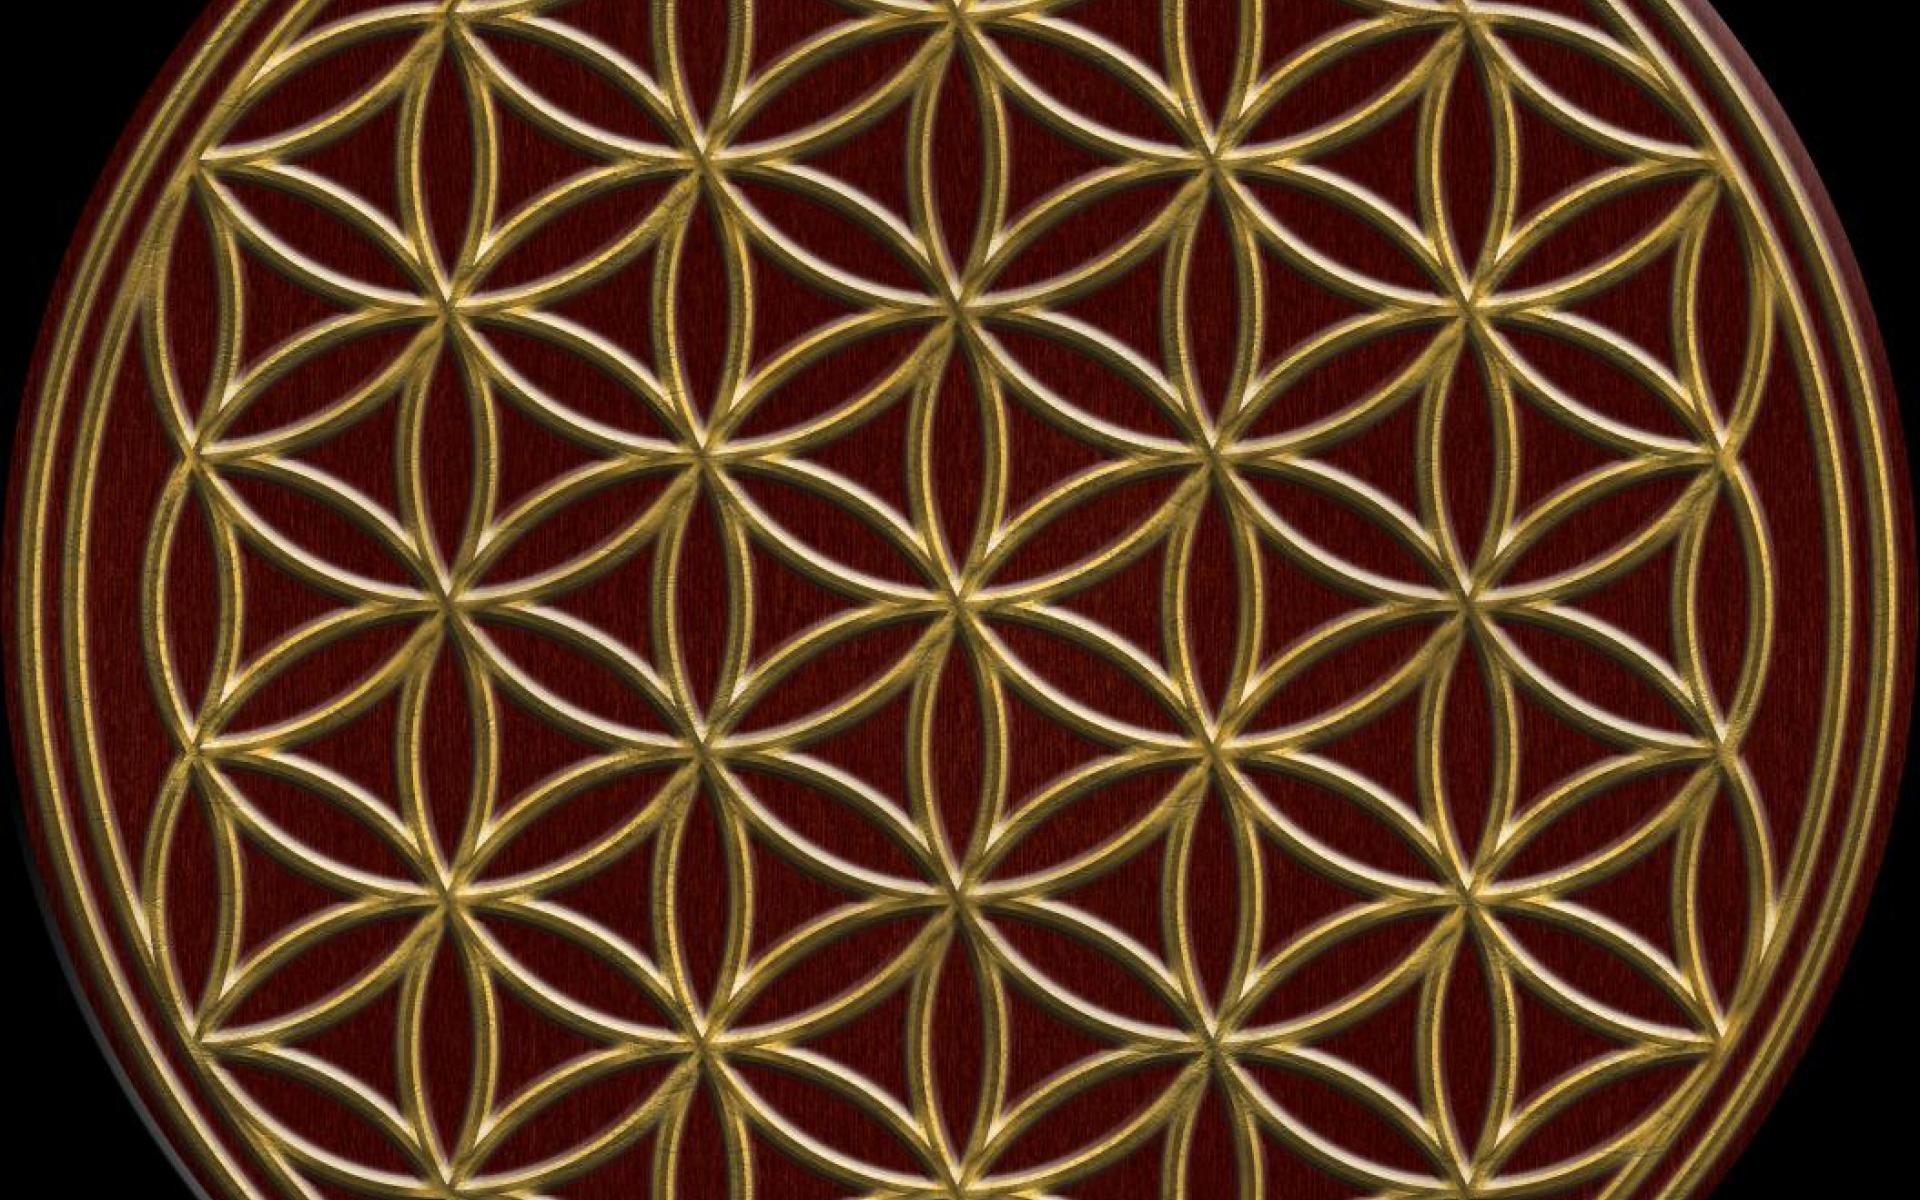 Flower of life   91030   High Quality and Resolution Wallpapers on